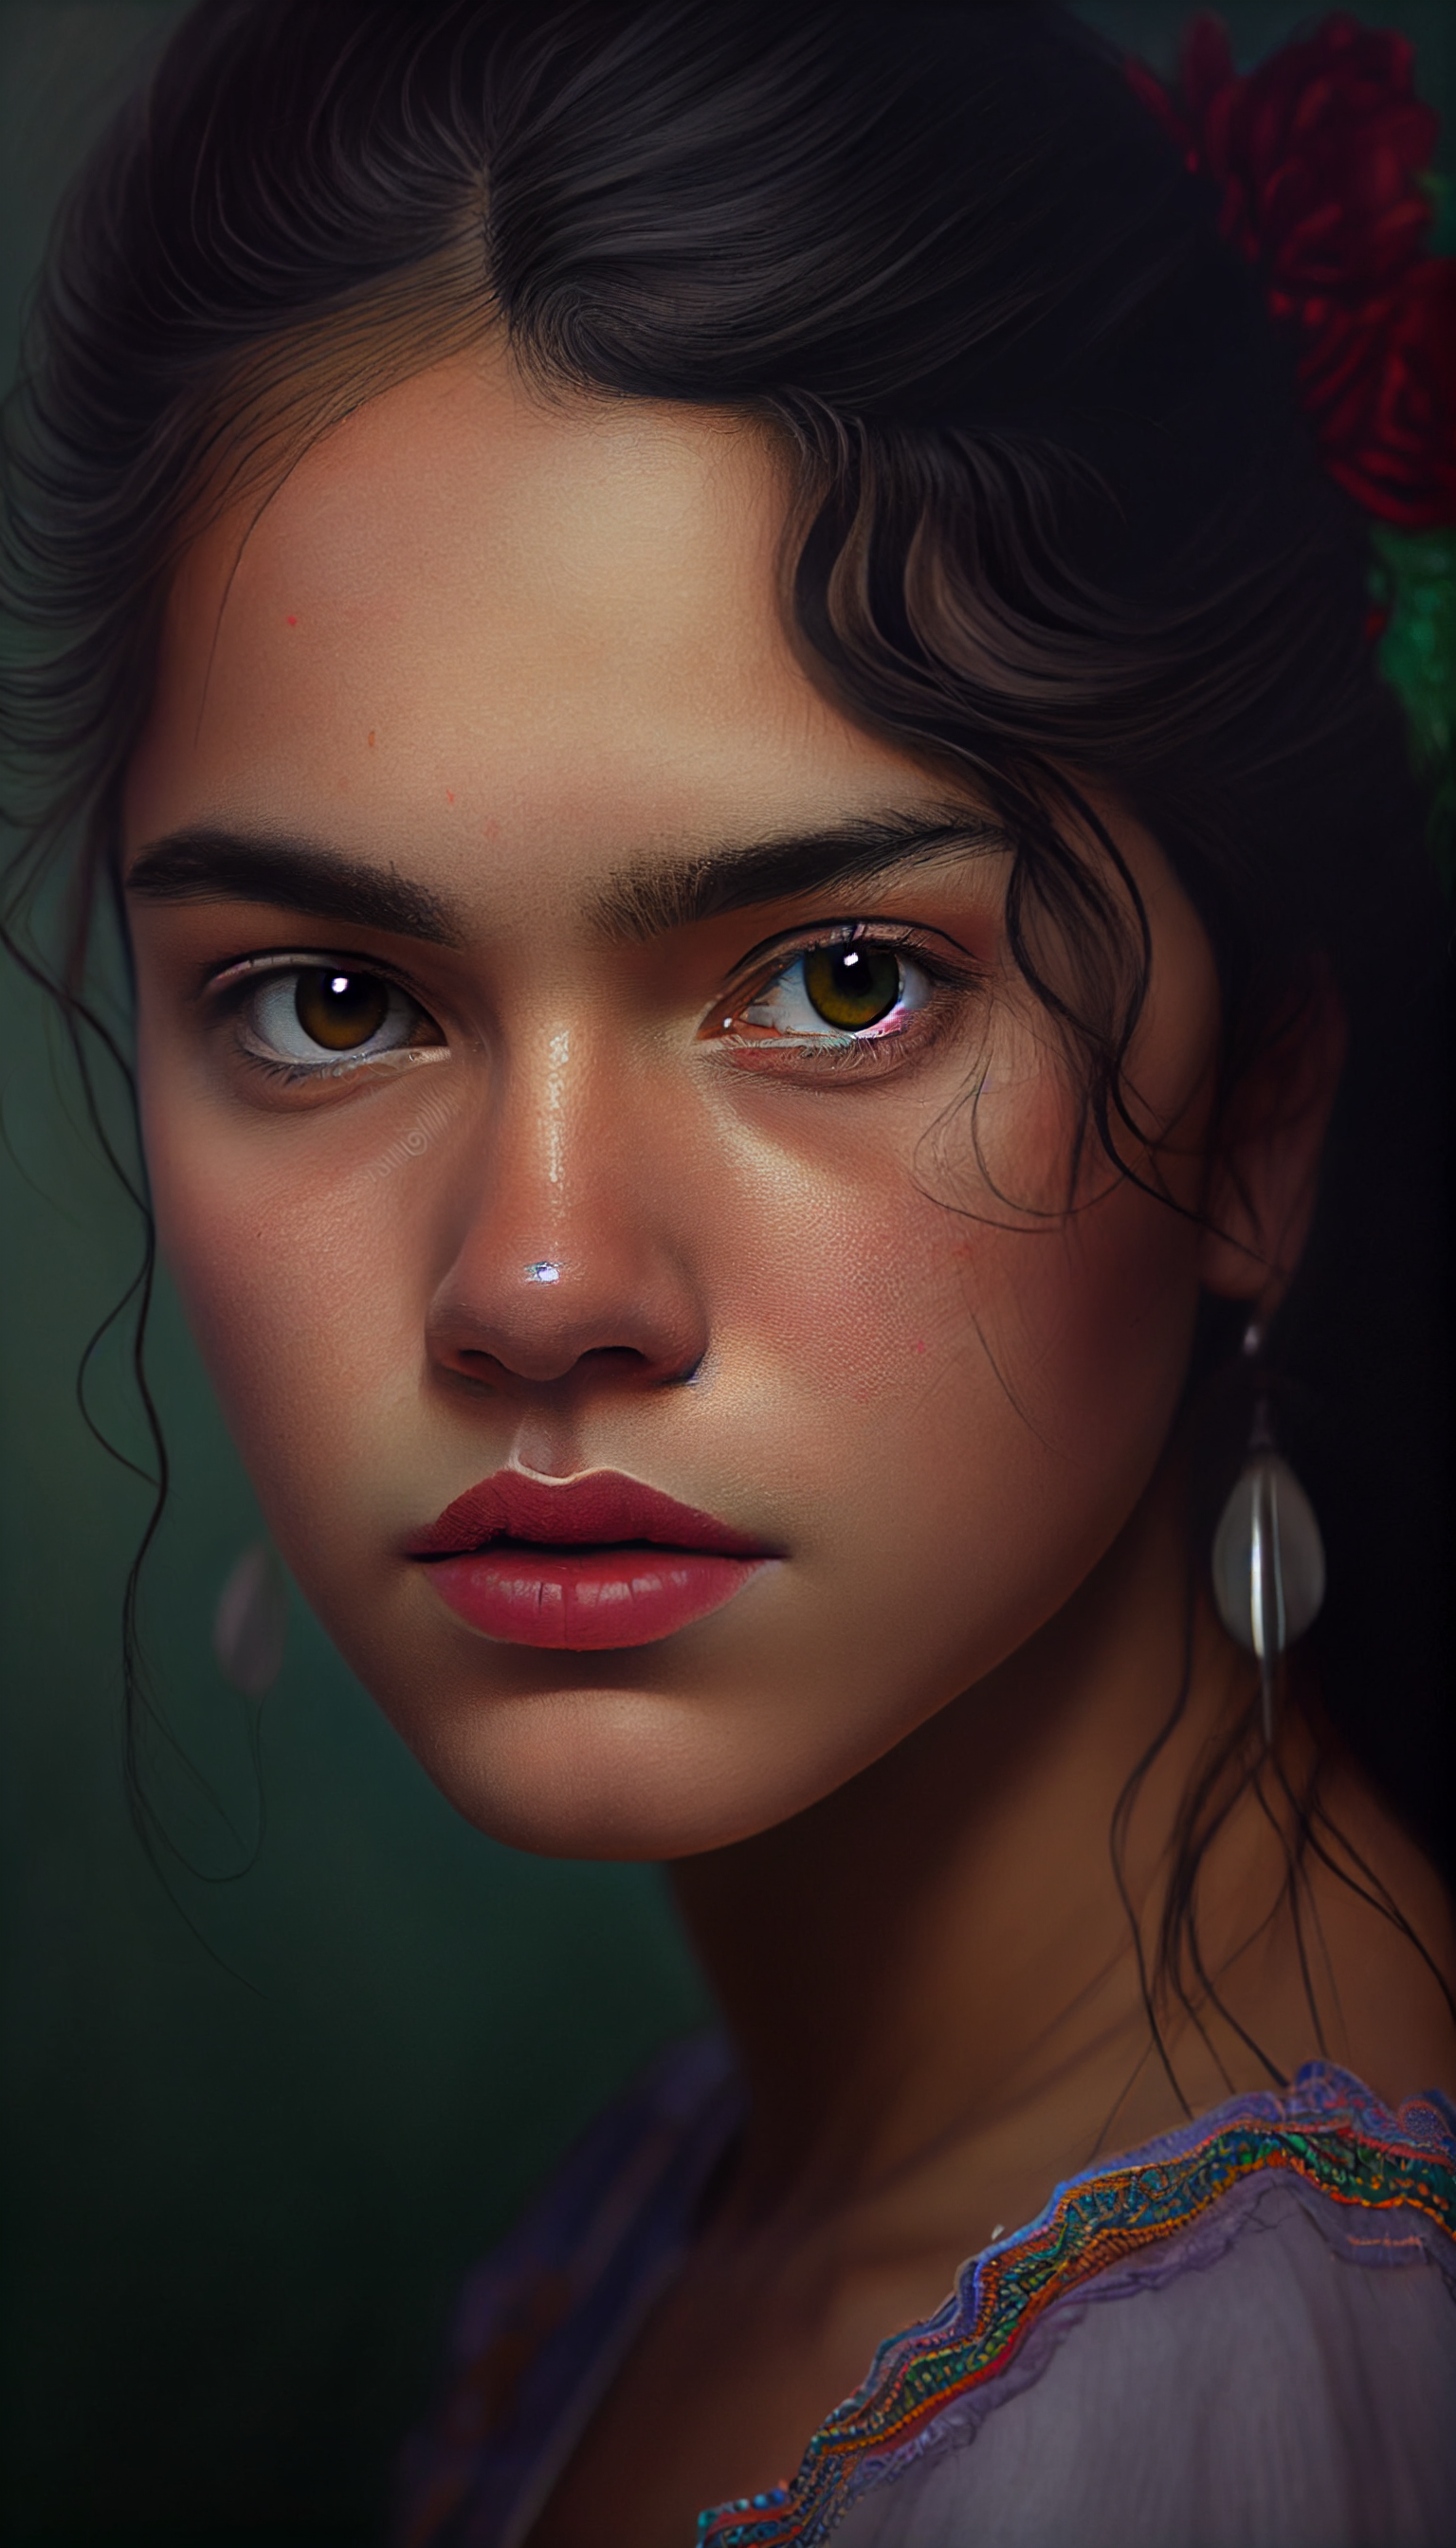 El_Topo_Loco_Beautiful_Mexican_woman_photo_realism_ultra-detail_87e40316-2004-46ae-9ae6-fed3a3f76957.png